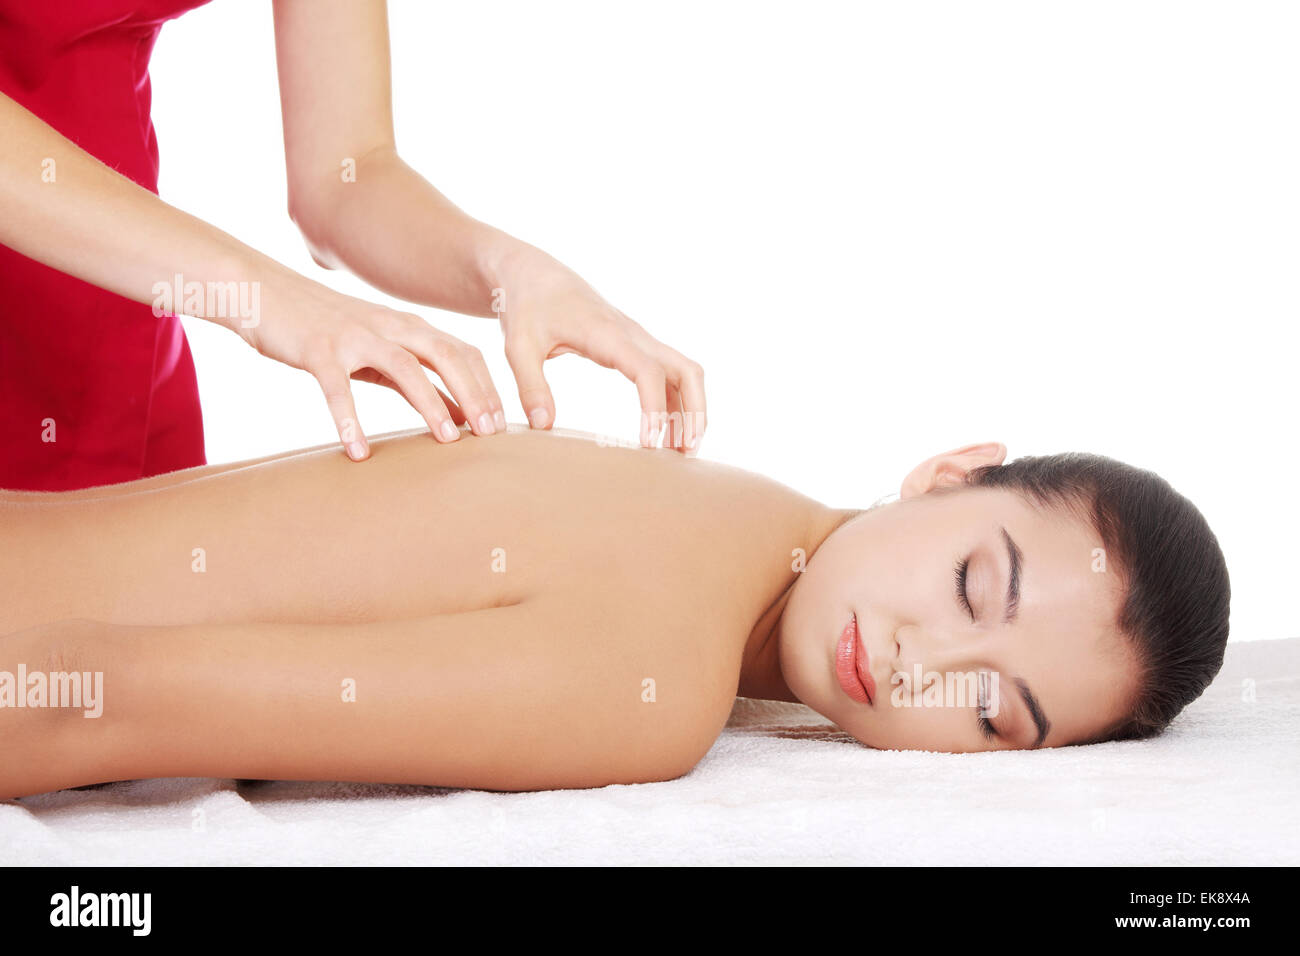 Young woman relaxing beeing massaged Stock Photo